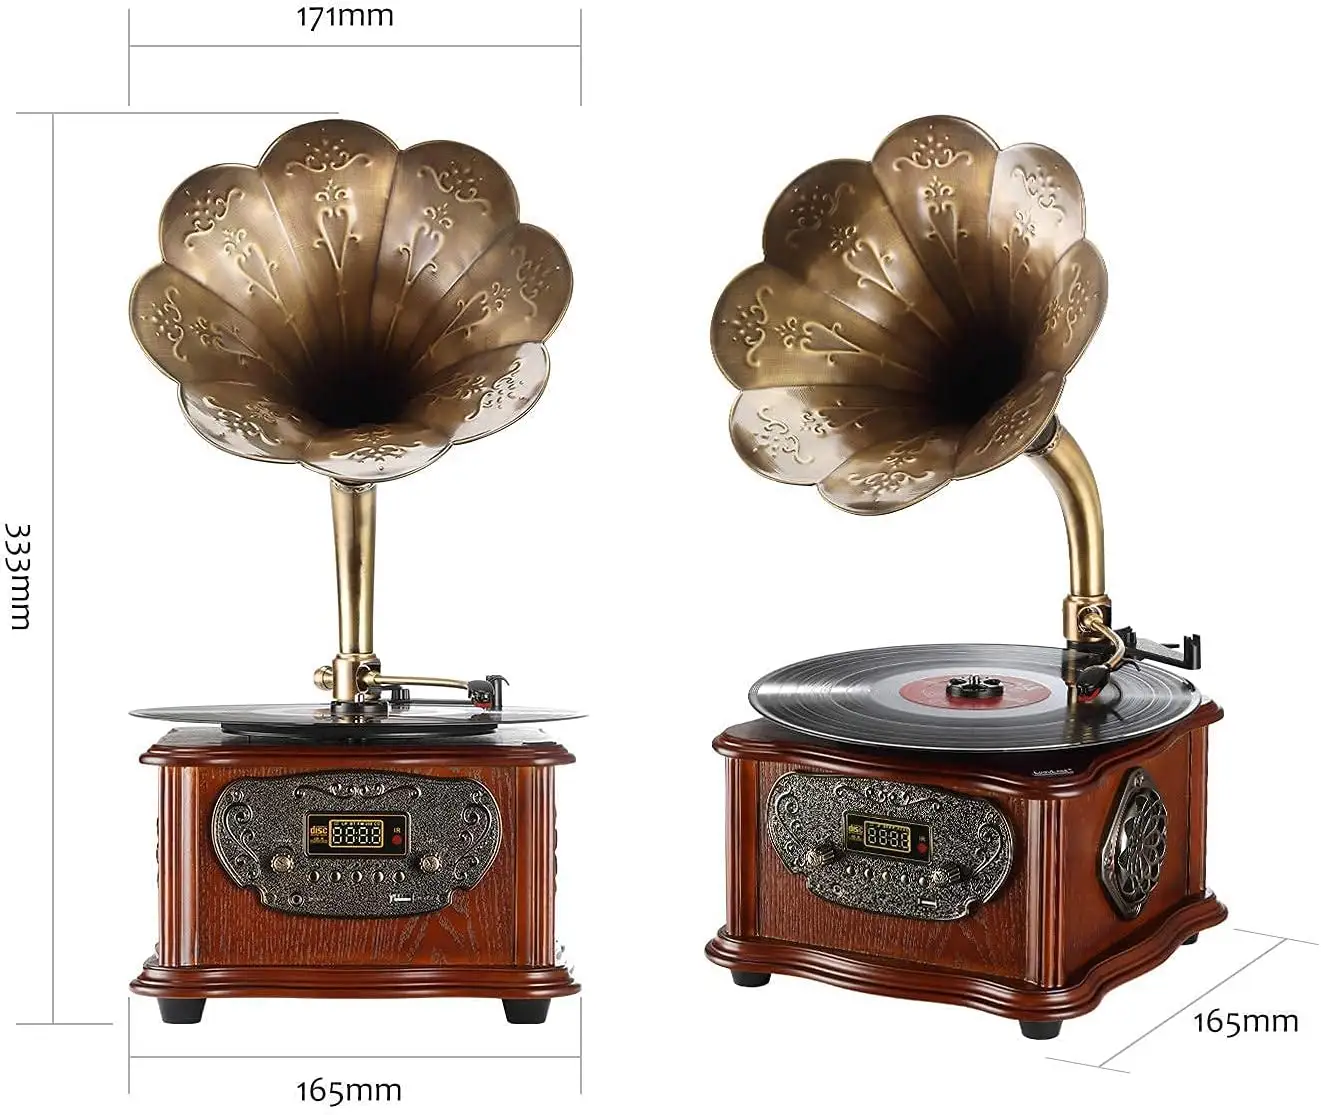 European High-End Antique Gramophone Turntable Wireless CD Solid Wooden Vintage Vinyl Record Player Bluetooth Mini Aux Home